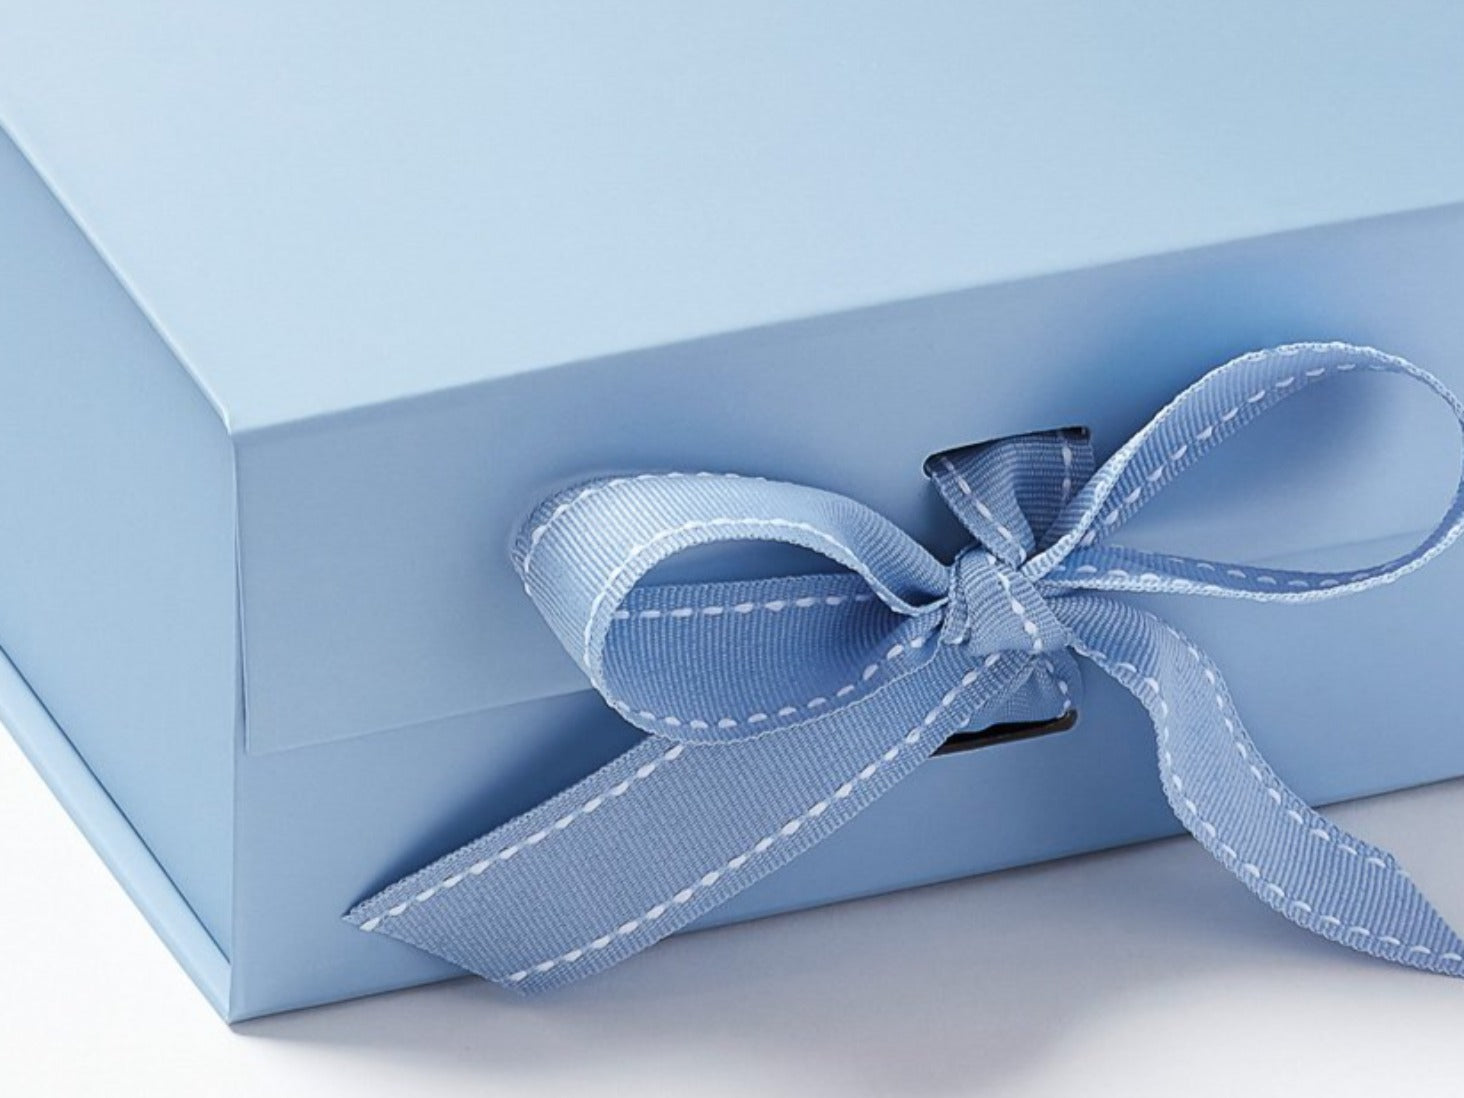 Pale Blue Large Gift Box with Ribbon